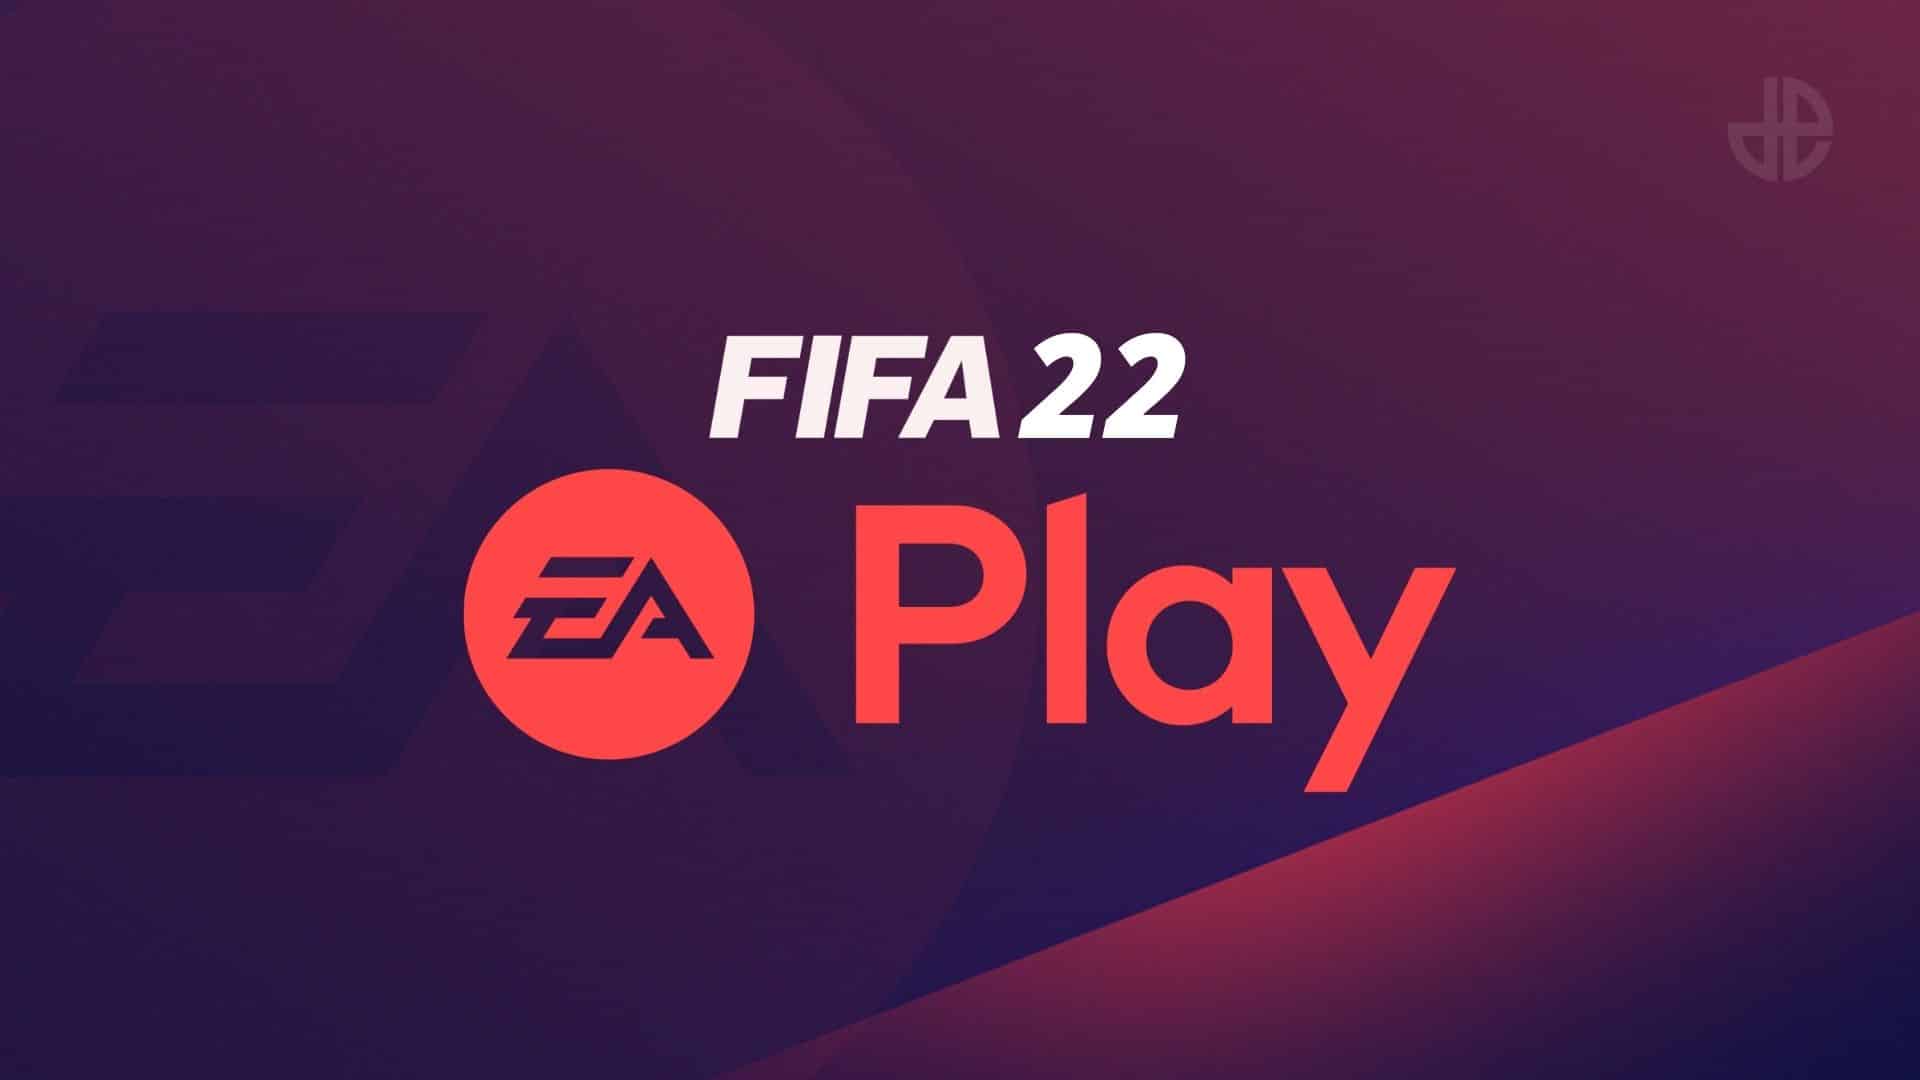 FIFA 22 is free to play right now, if you're quick